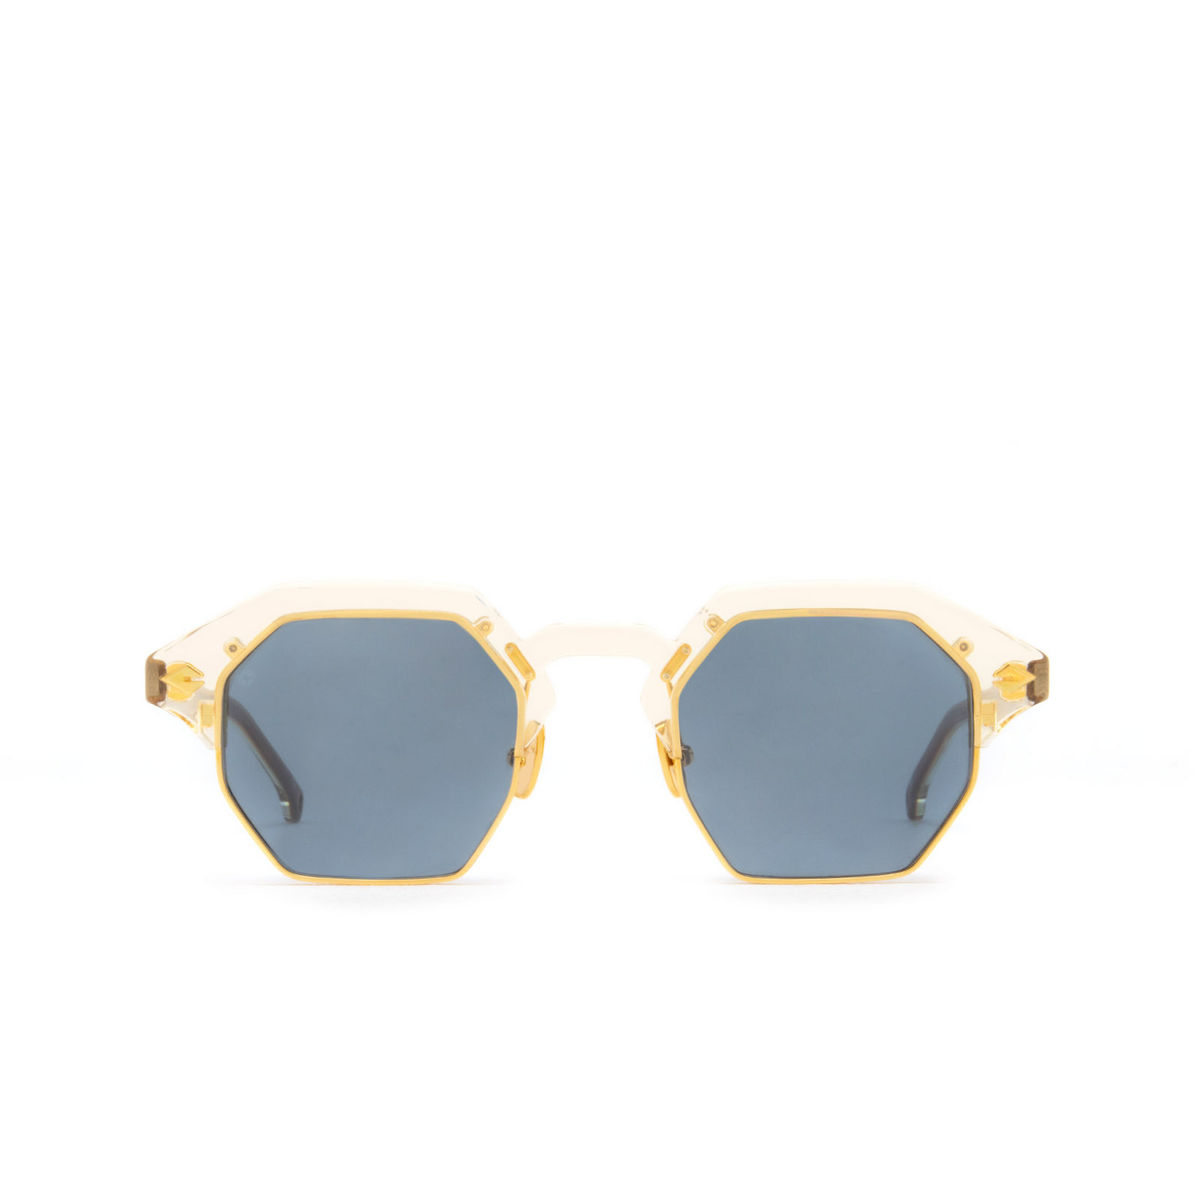 T Henri GULLWING Sunglasses CHAMPAGNE - front view